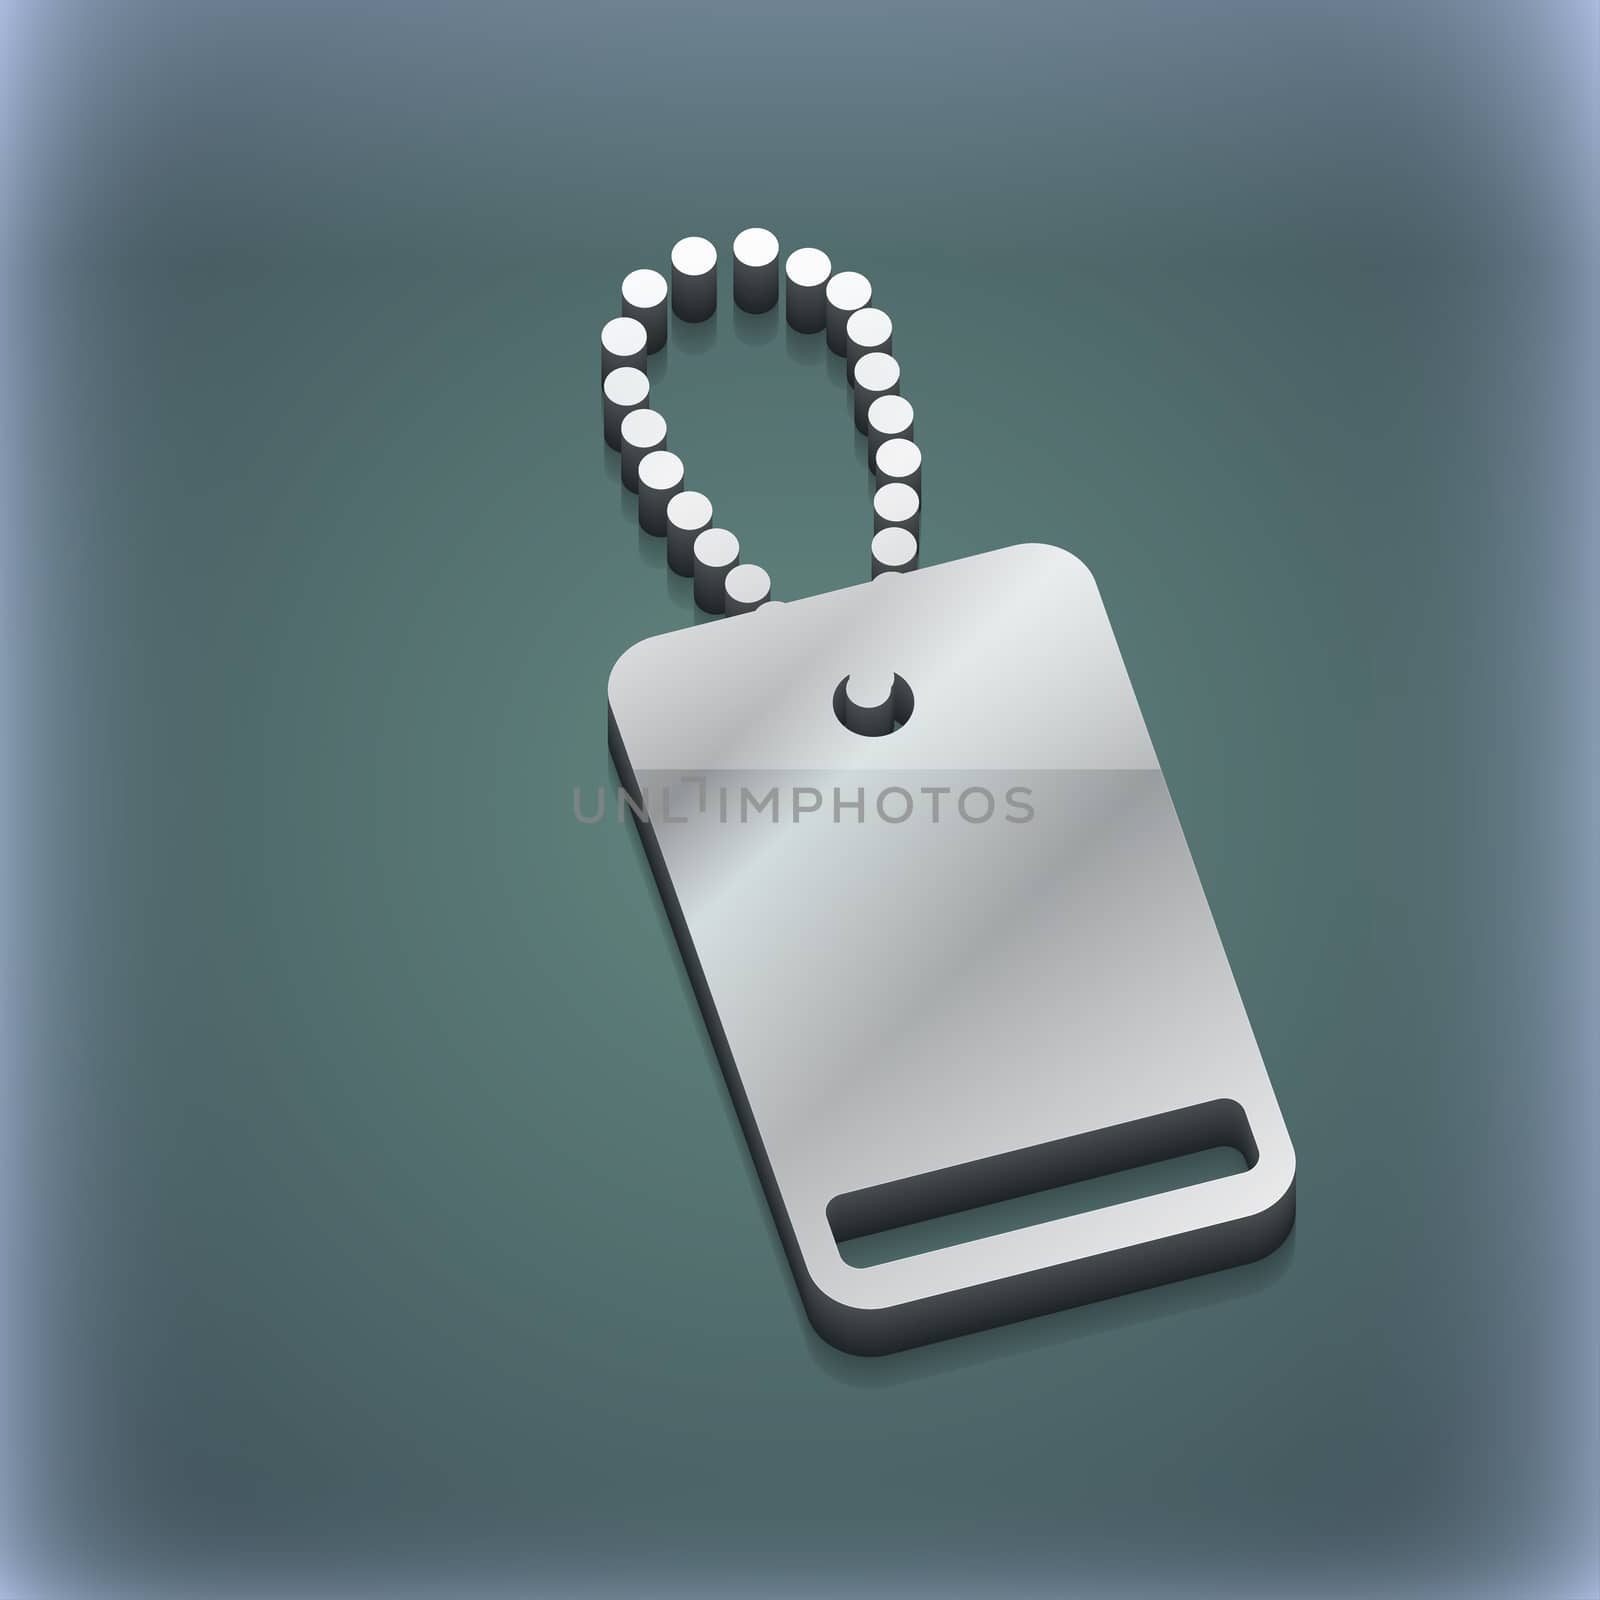 army chains icon symbol. 3D style. Trendy, modern design with space for your text illustration. Raster version